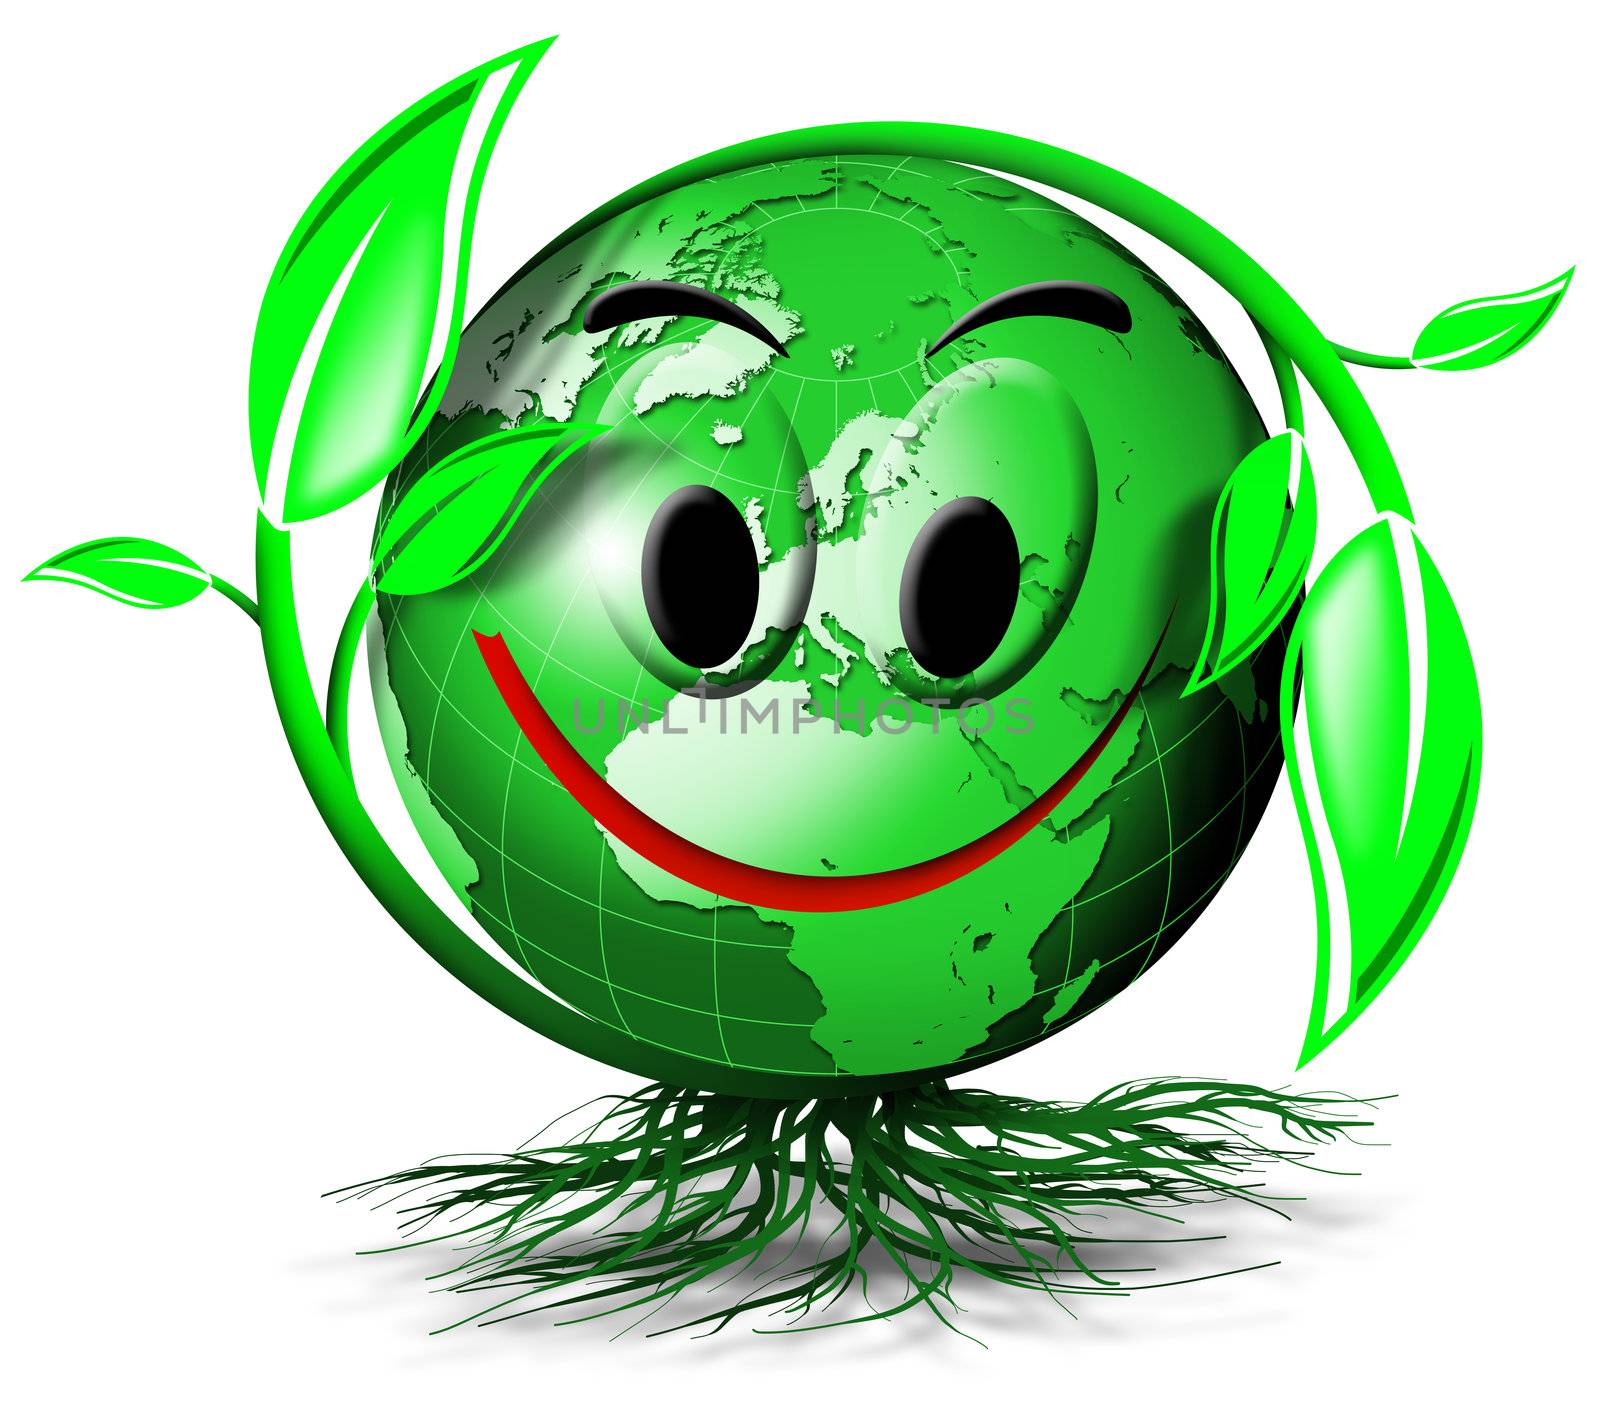 World tree smile by catalby